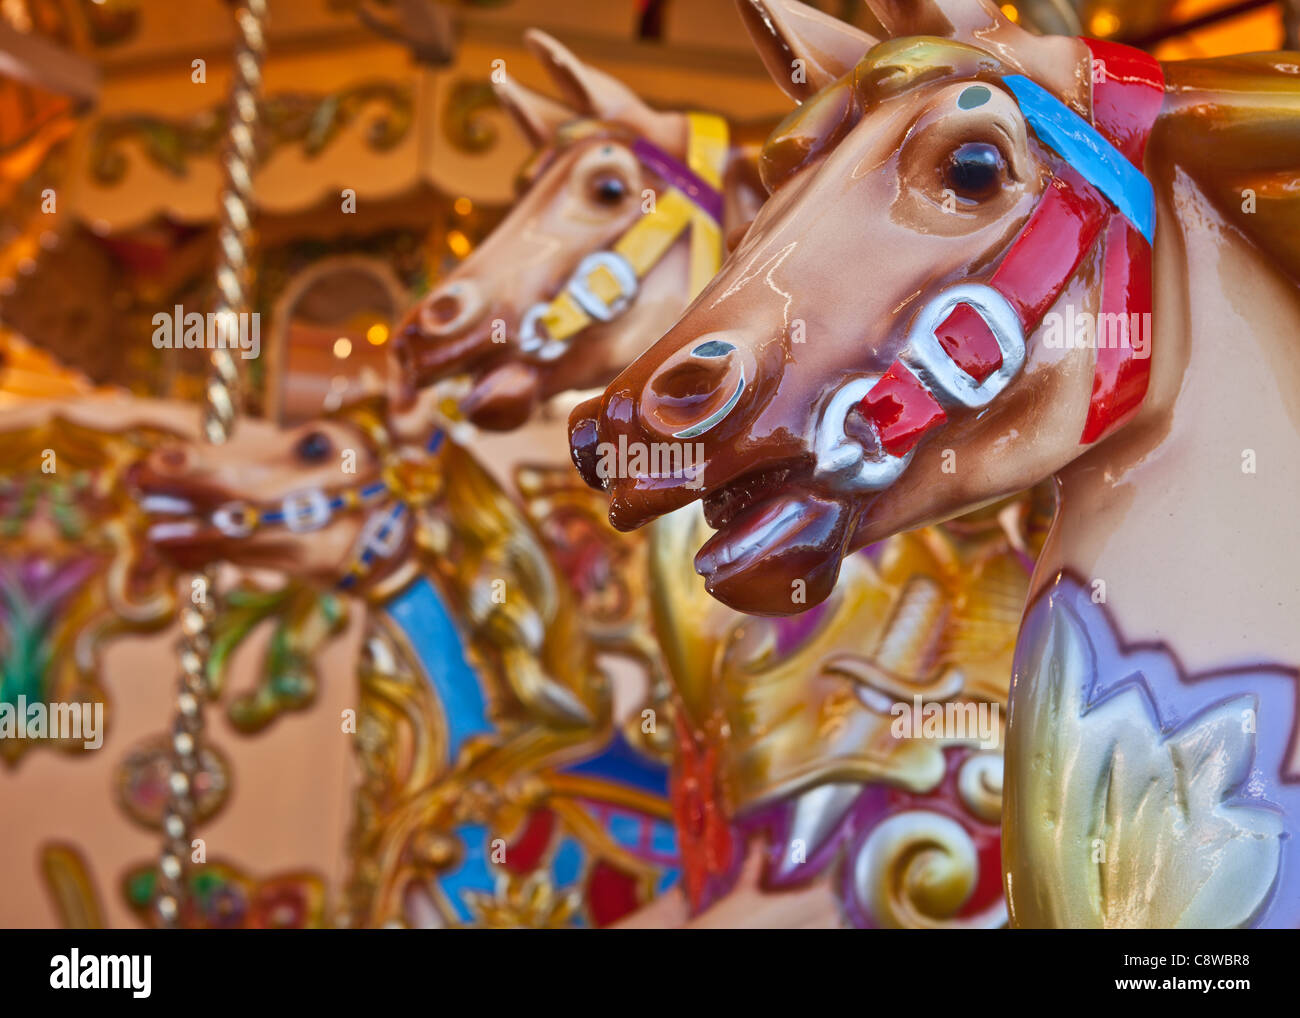 merry-go-round at the funfair Stock Photo